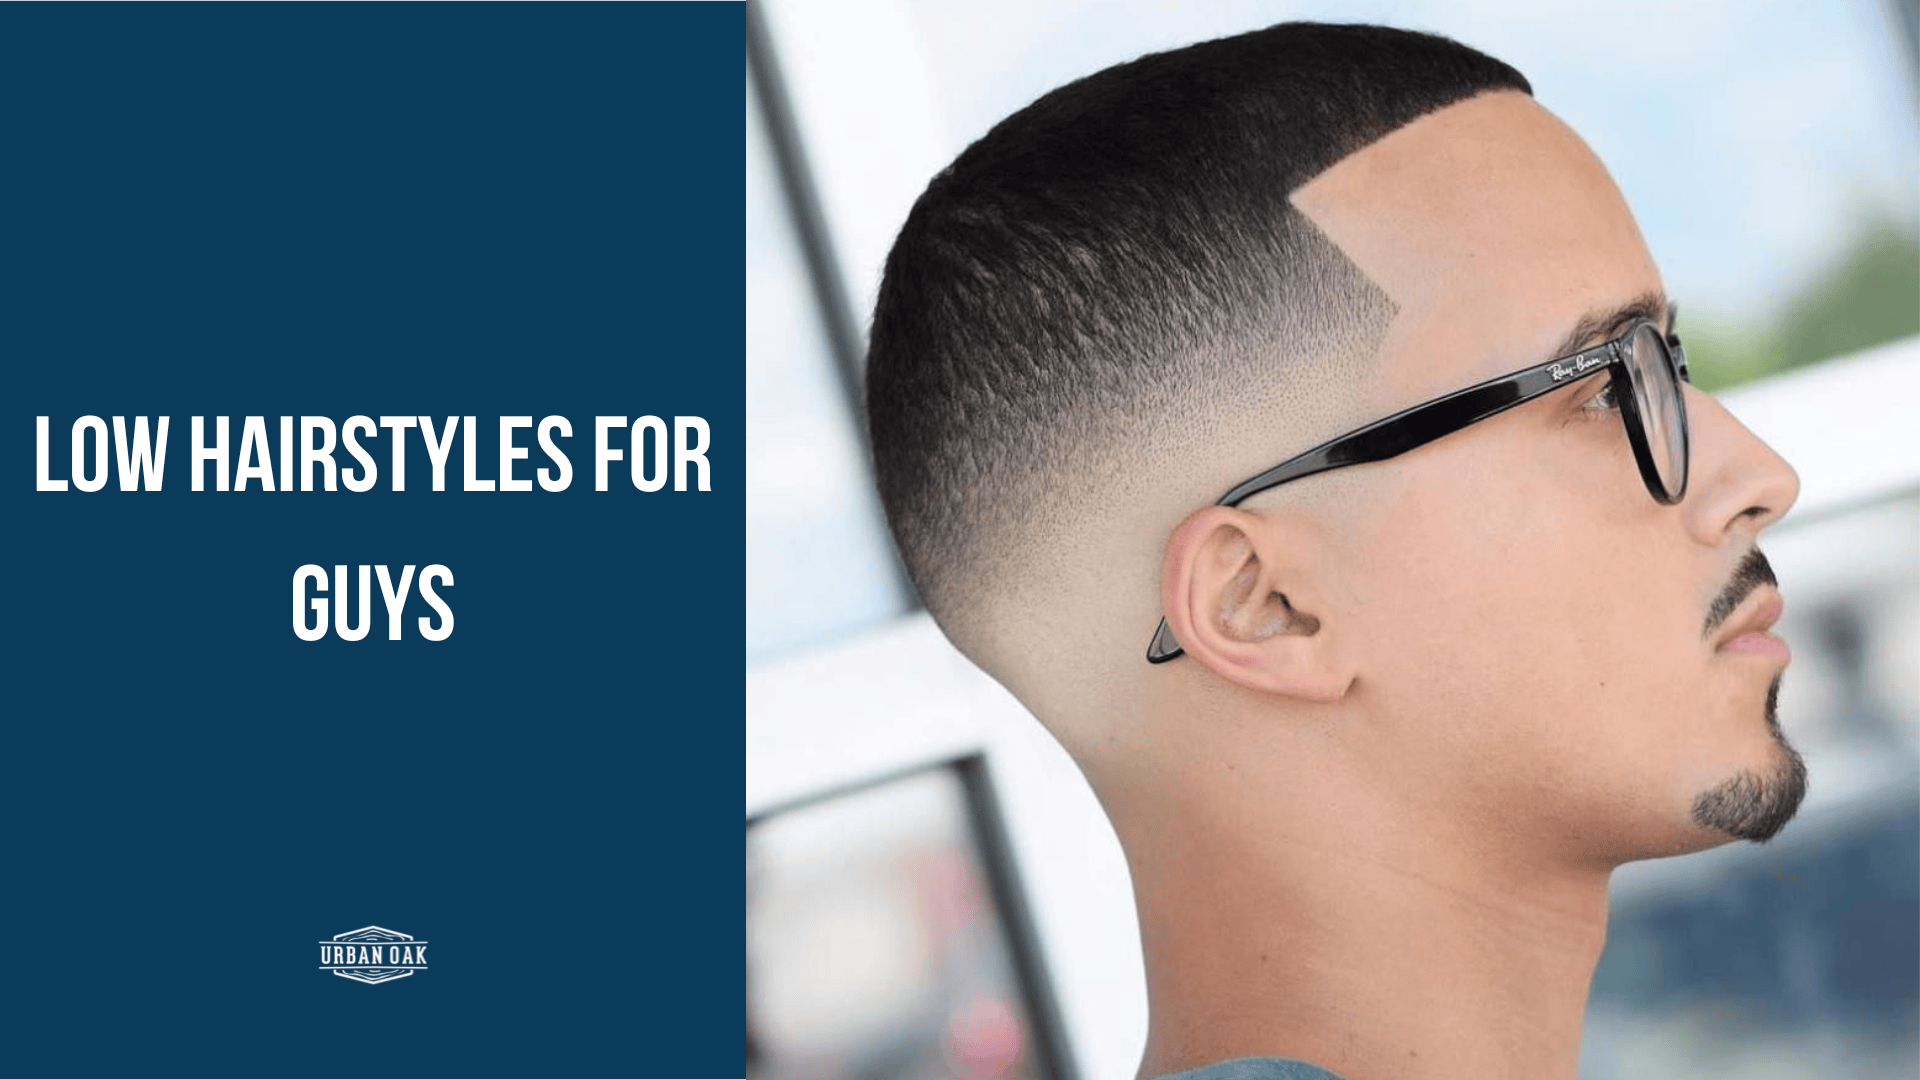 Low Hairstyles for Guys